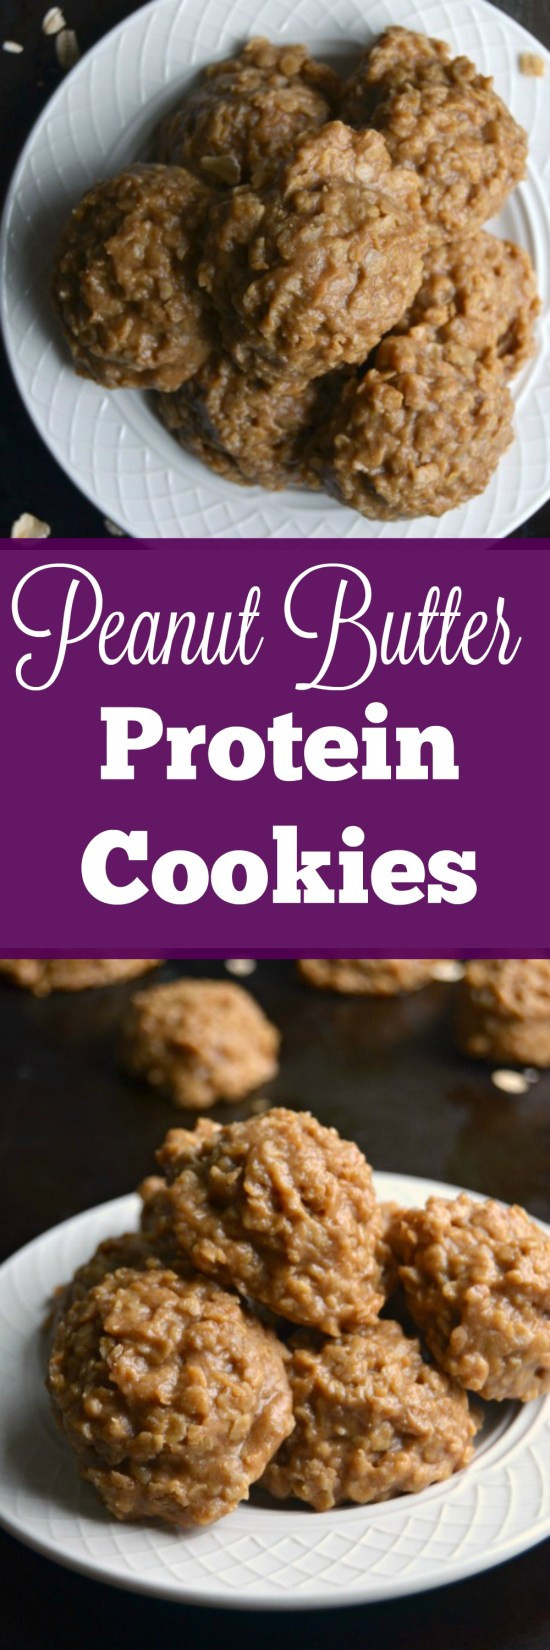 Peanut Butter Protein Cookies
 No Bake Peanut Butter Protein Cookies Kate Moving Forward